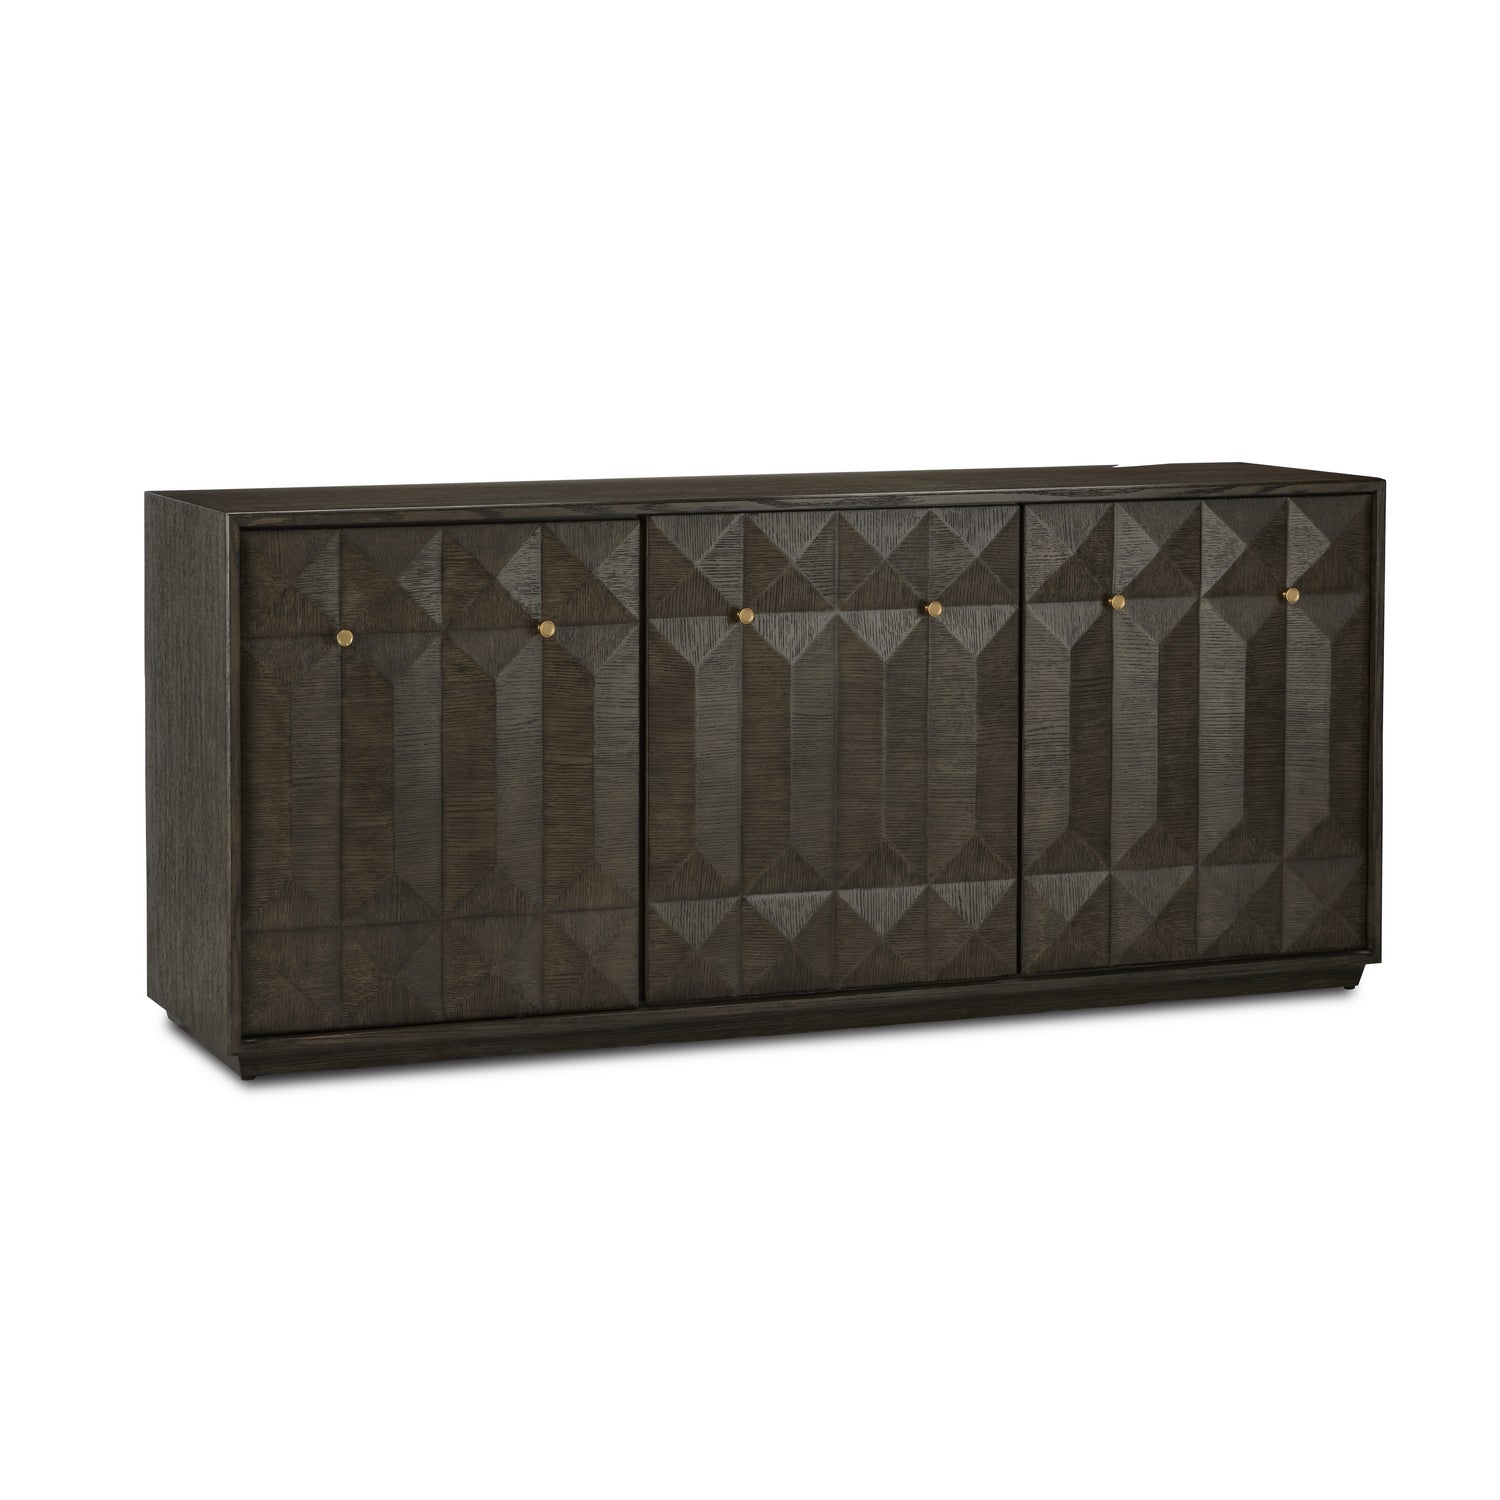 Currey and Company - 3000-0227 - Credenza - Kendall - Dove Gray/Polished Brass